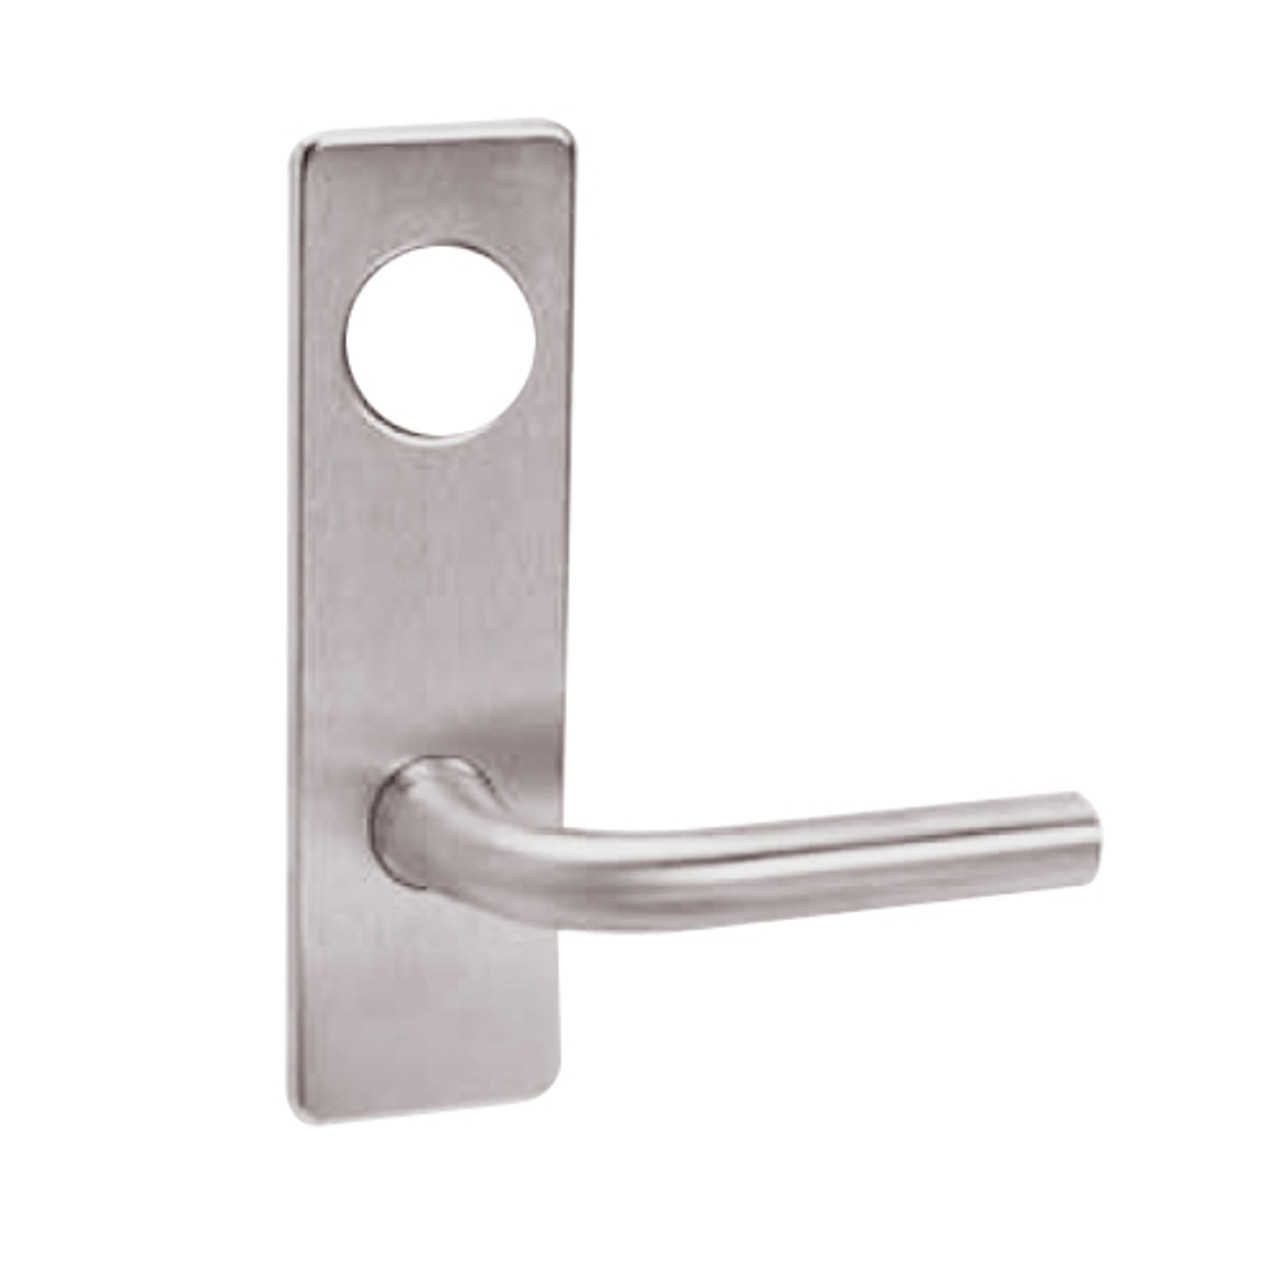 ML2069-RSM-630-CL6 Corbin Russwin ML2000 Series IC 6-Pin Less Core Mortise Institution Privacy Locksets with Regis Lever in Satin Stainless